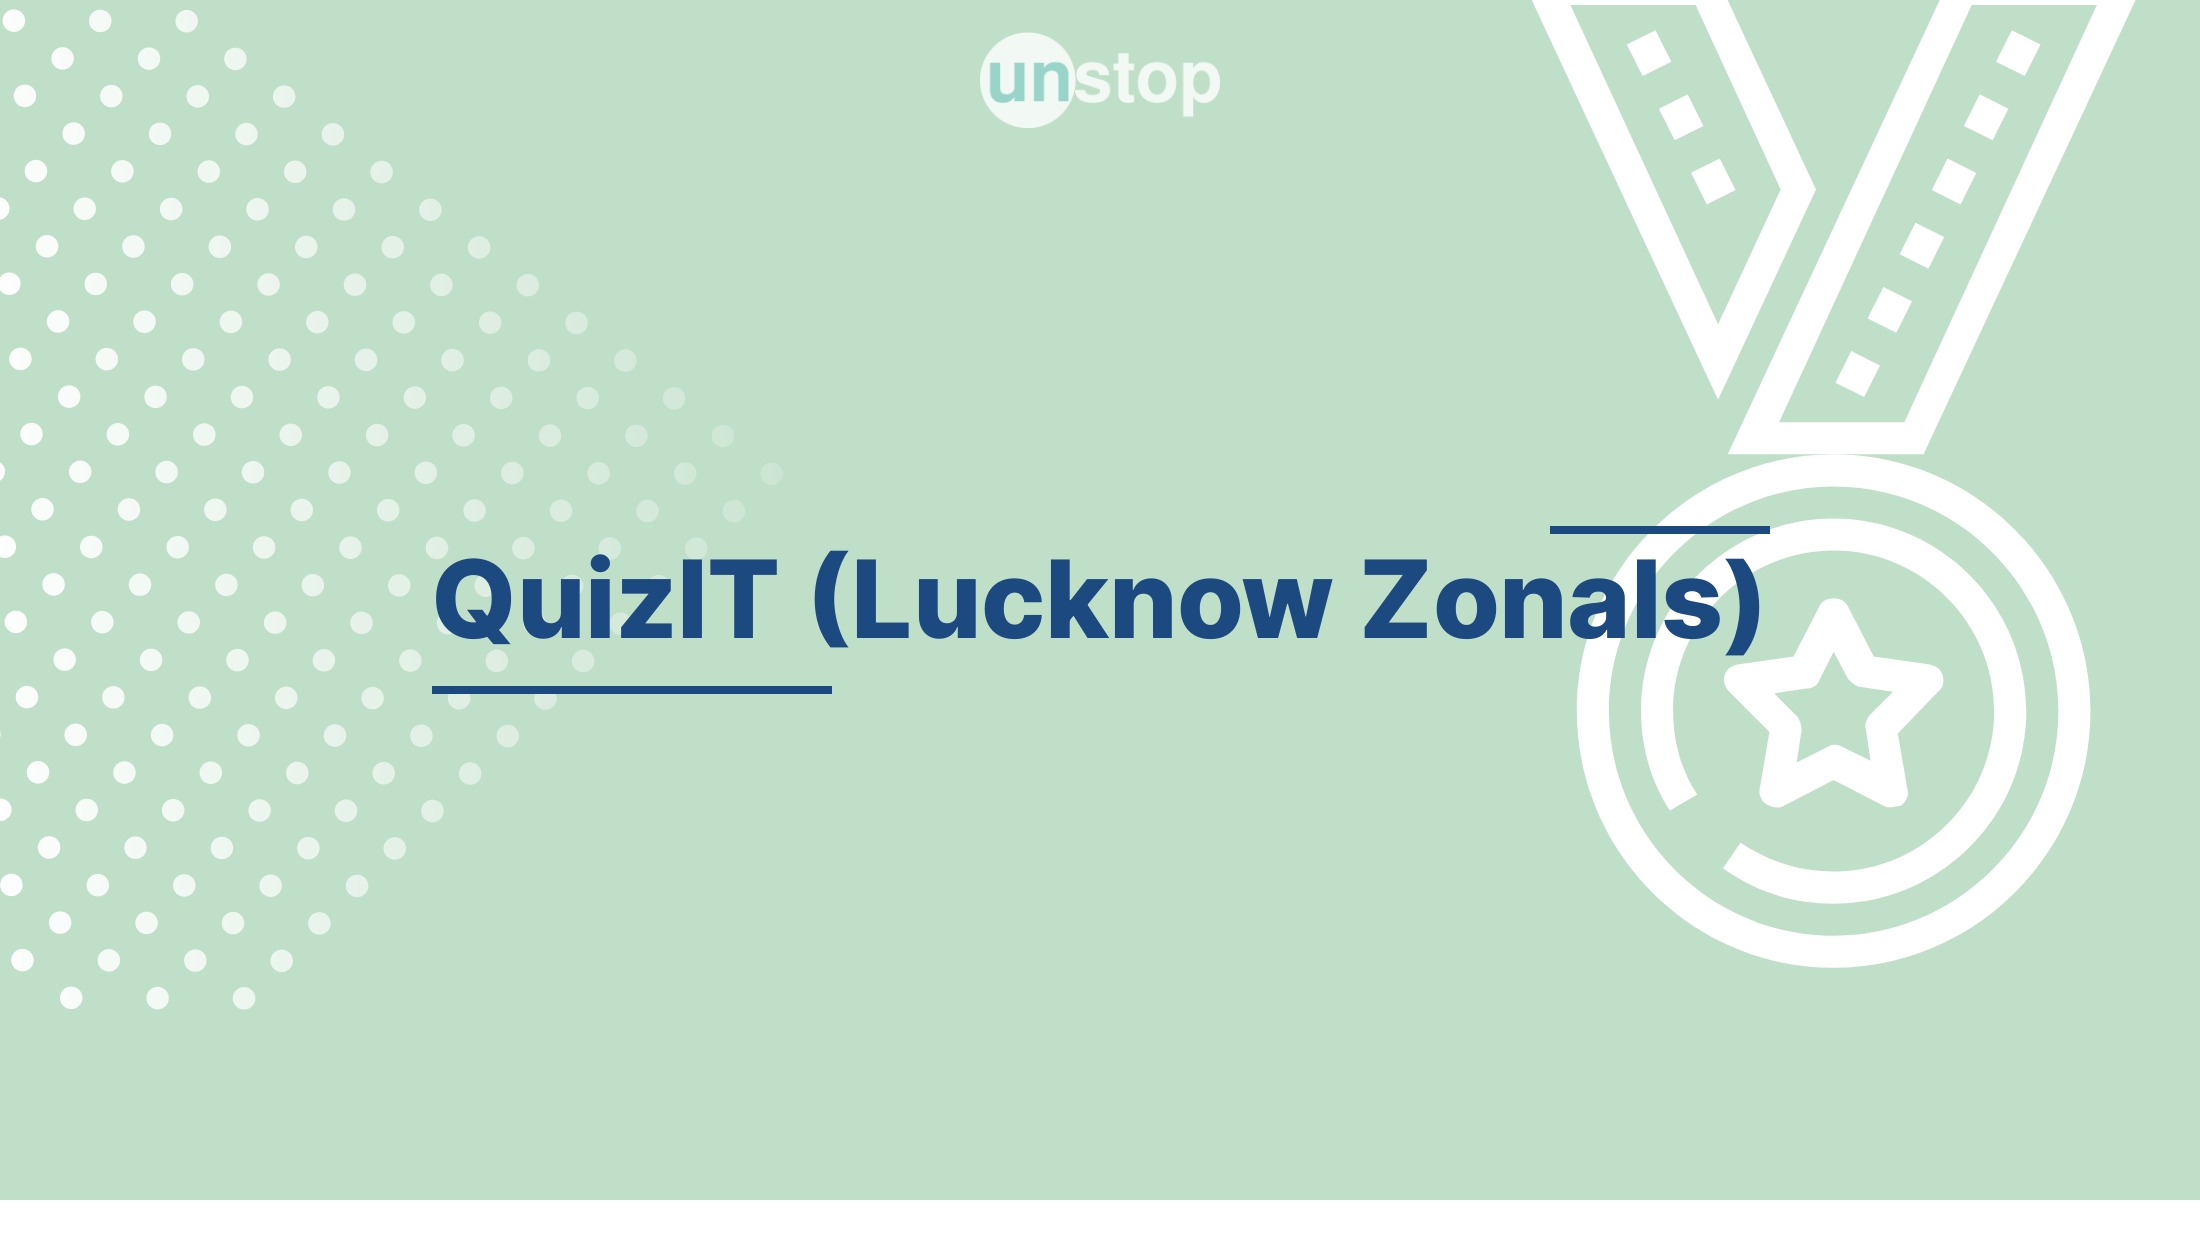 QuizIT (Lucknow Zonals) by Indian Institute of Technology (IIT